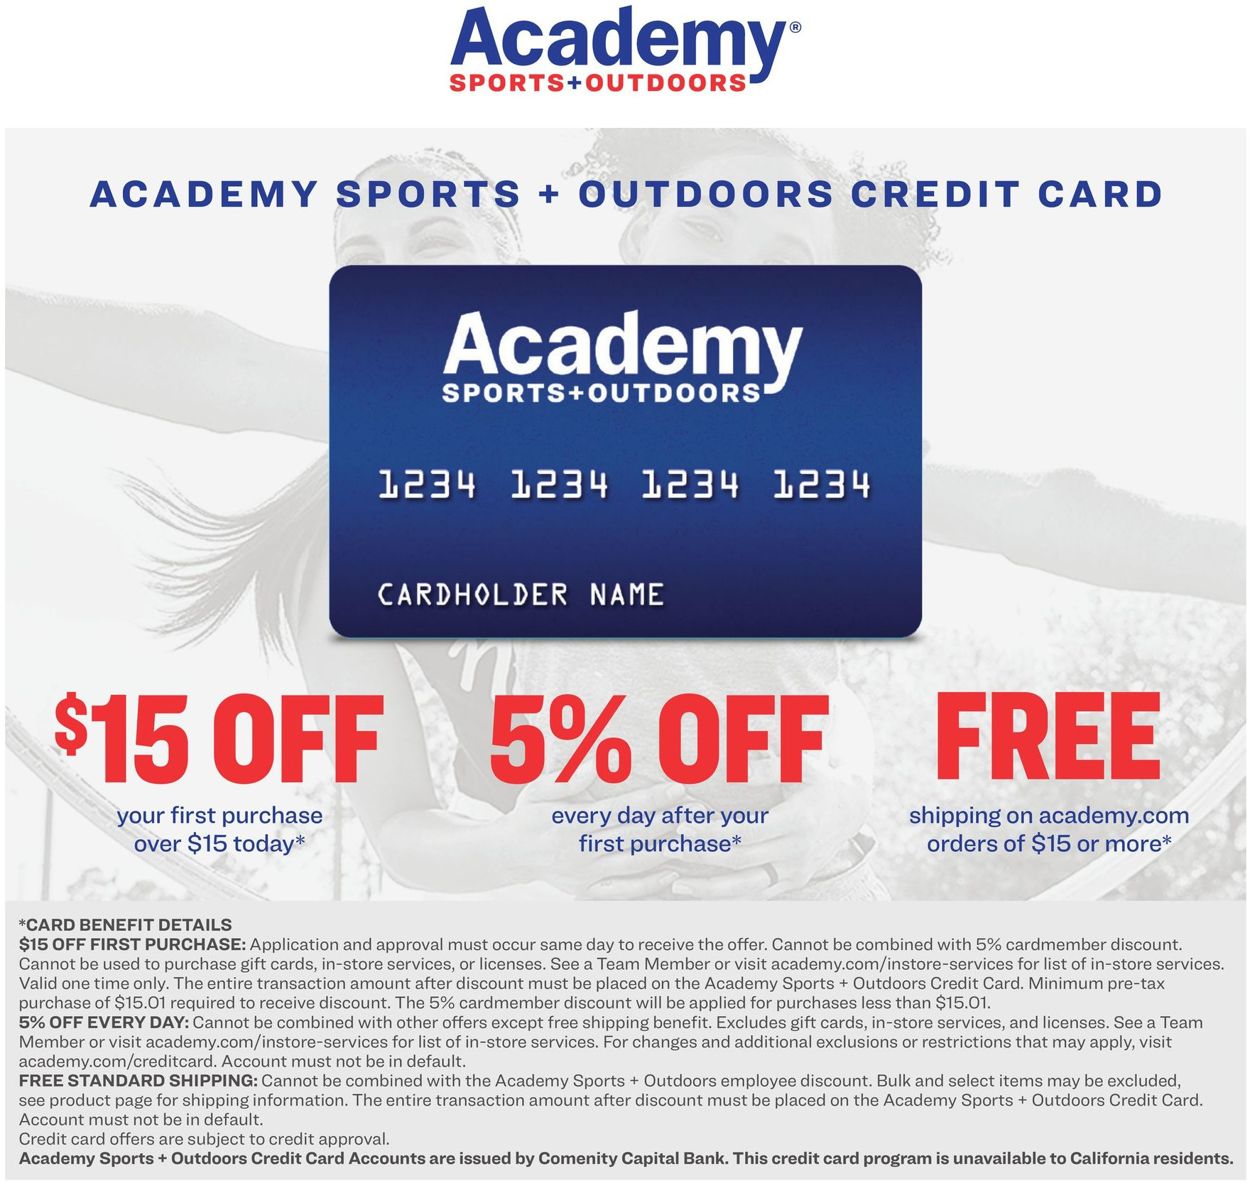 Catalogue Academy Sports from 03/22/2021